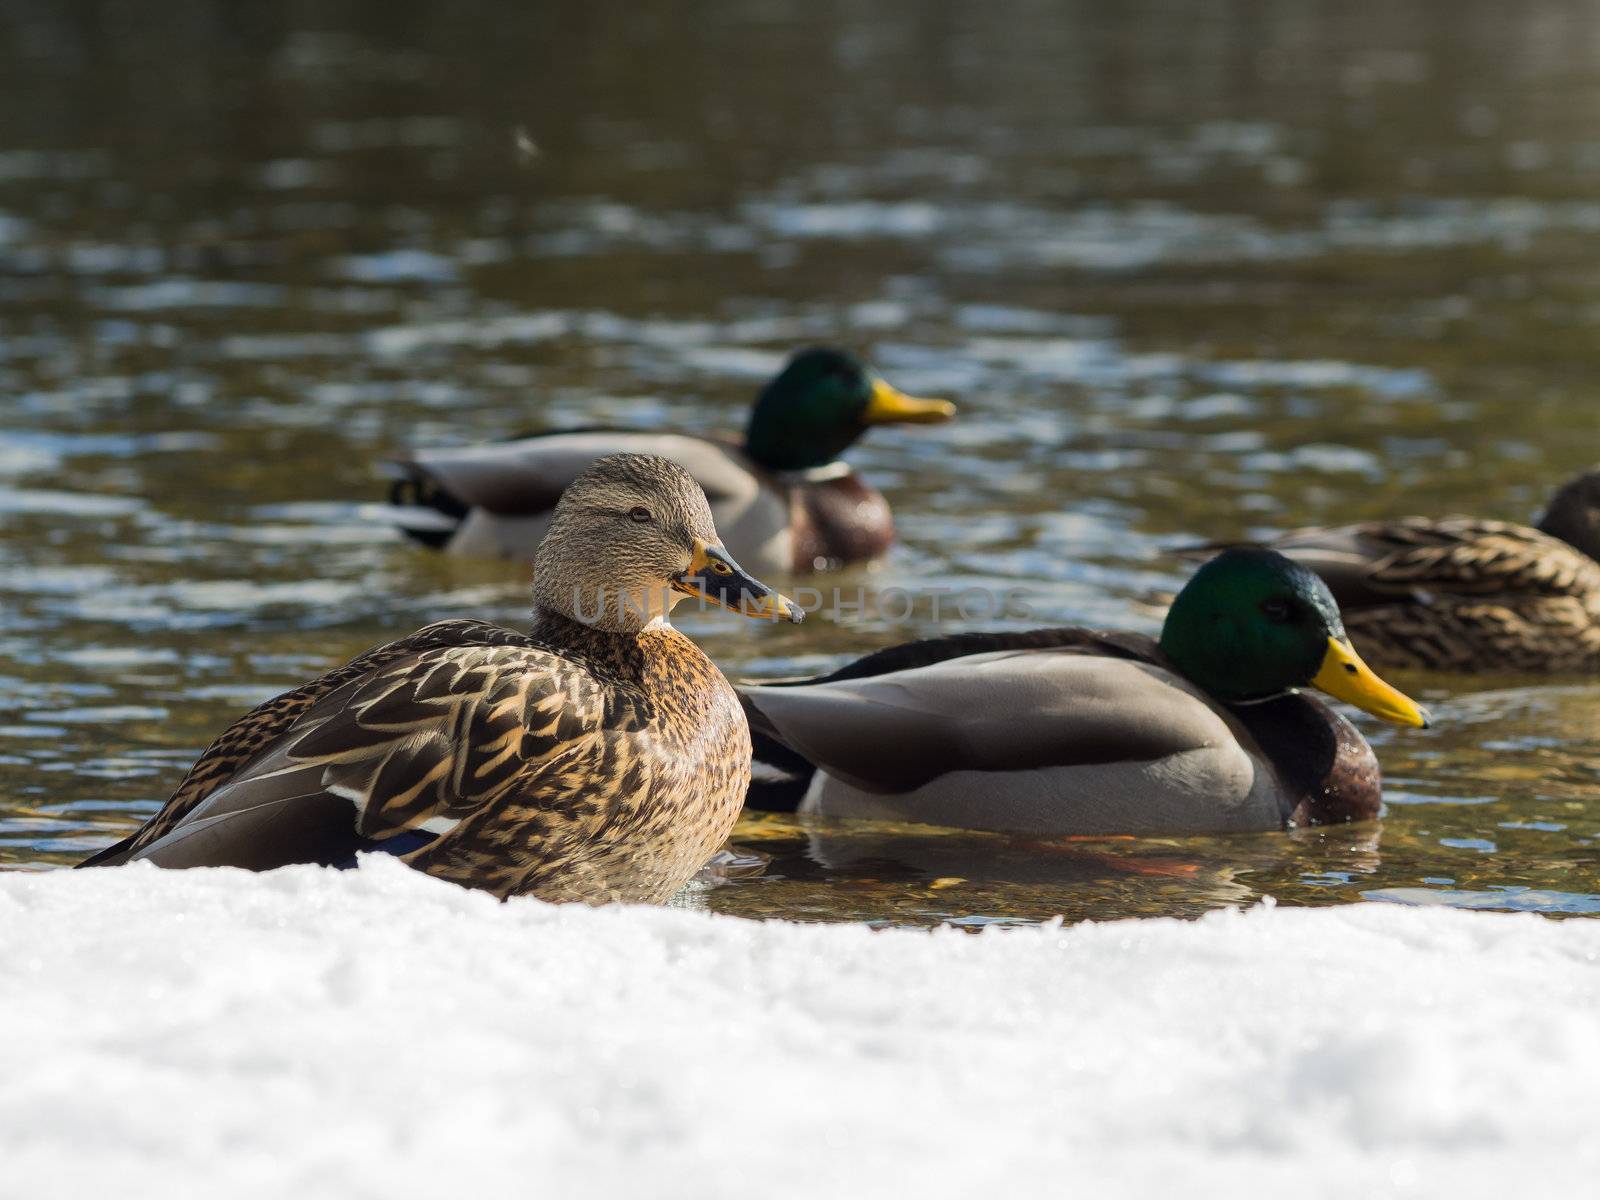 Ducks by the river in winter